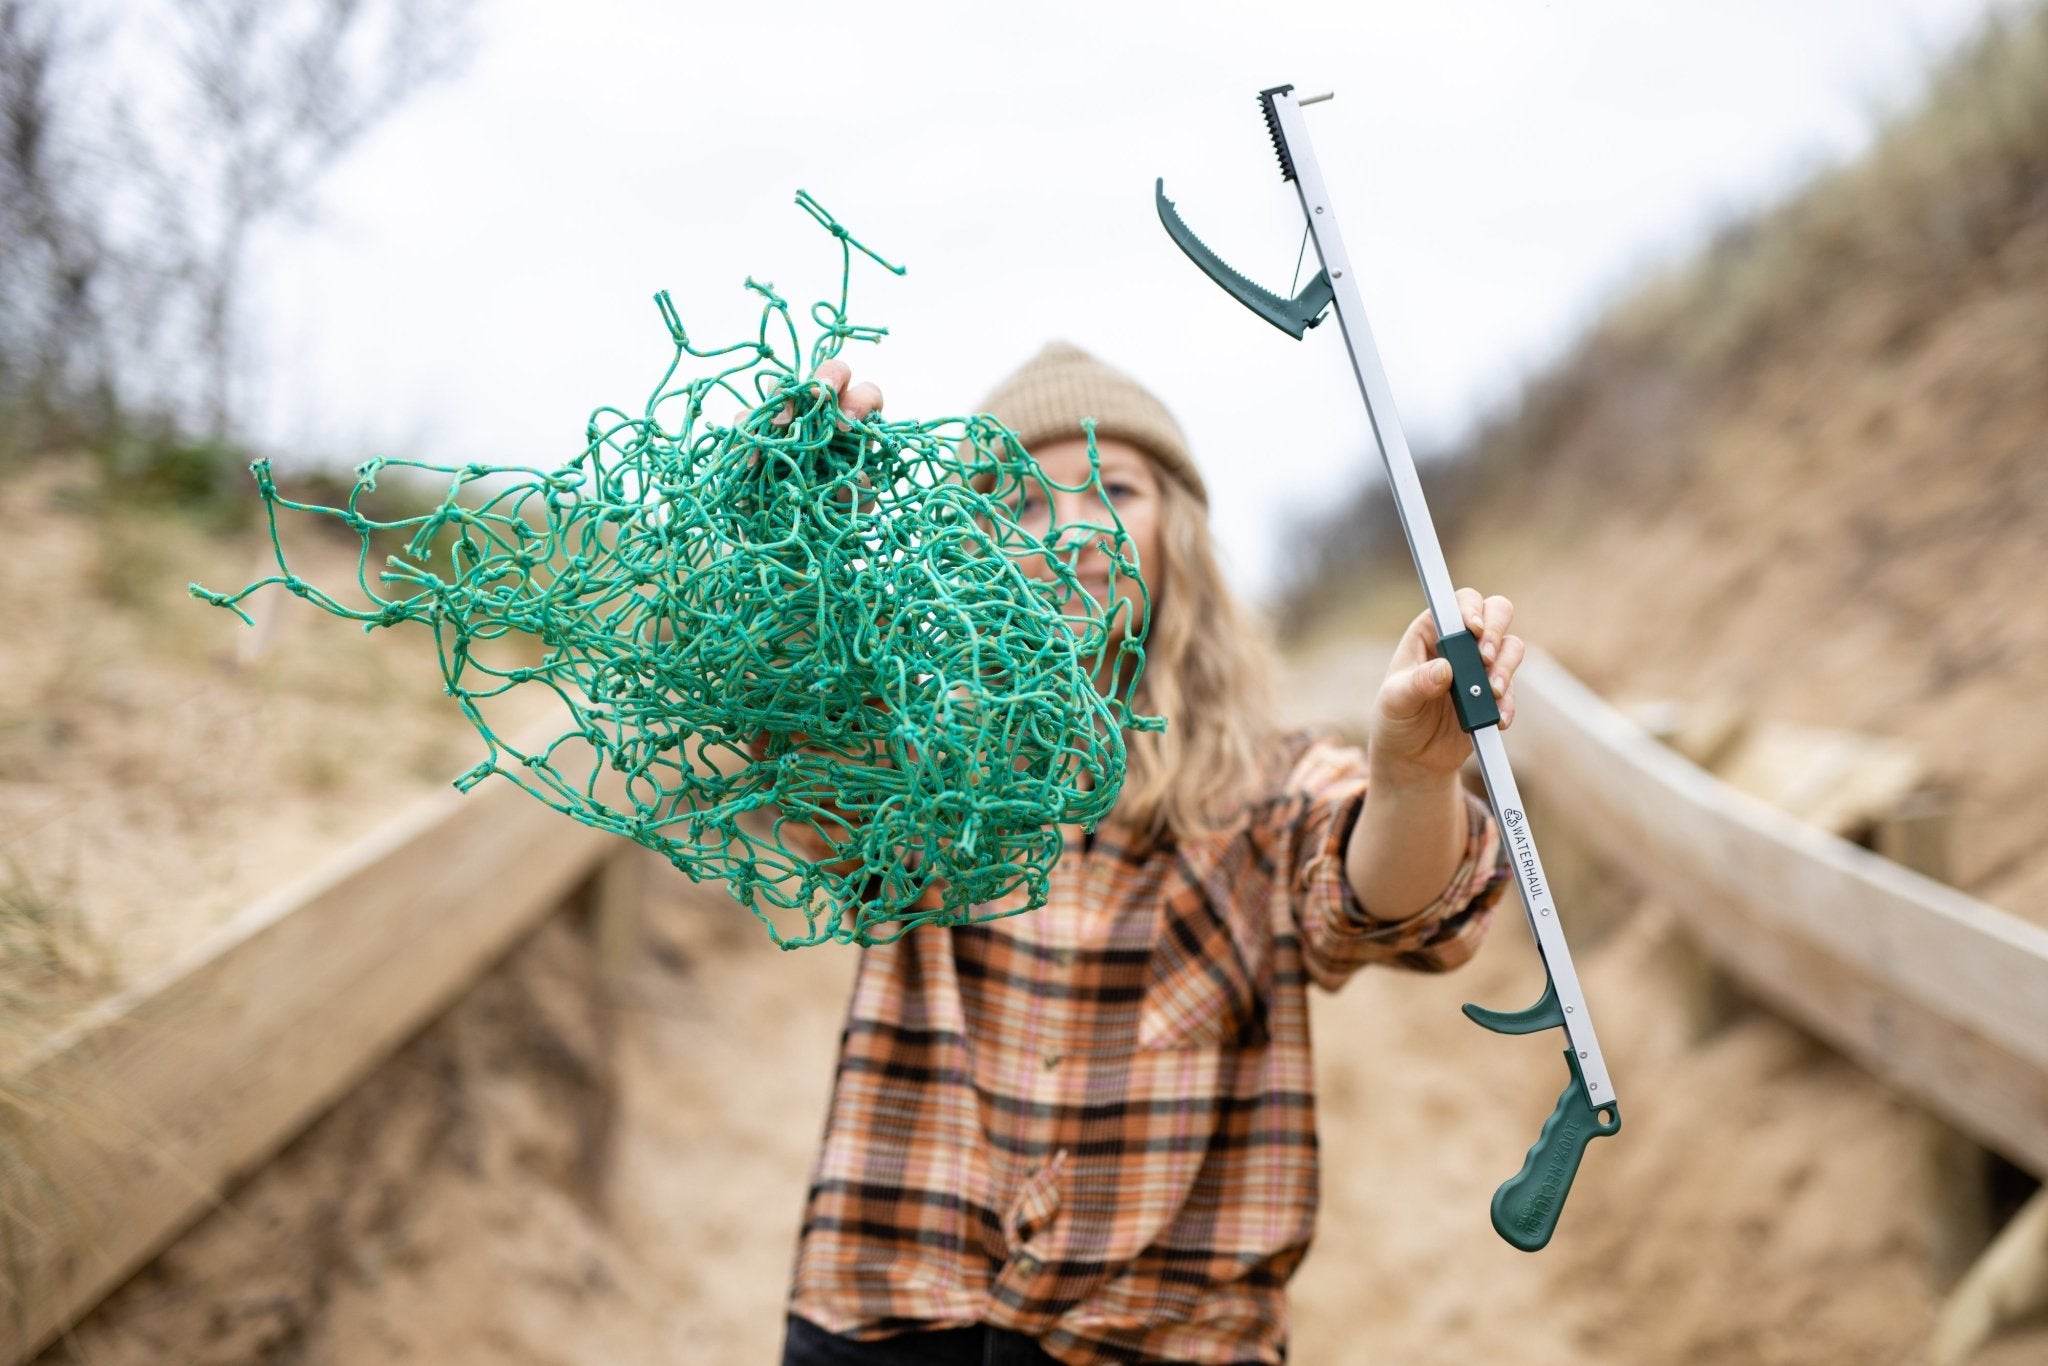 Litter picker being used on beach clean collecting ghost gear